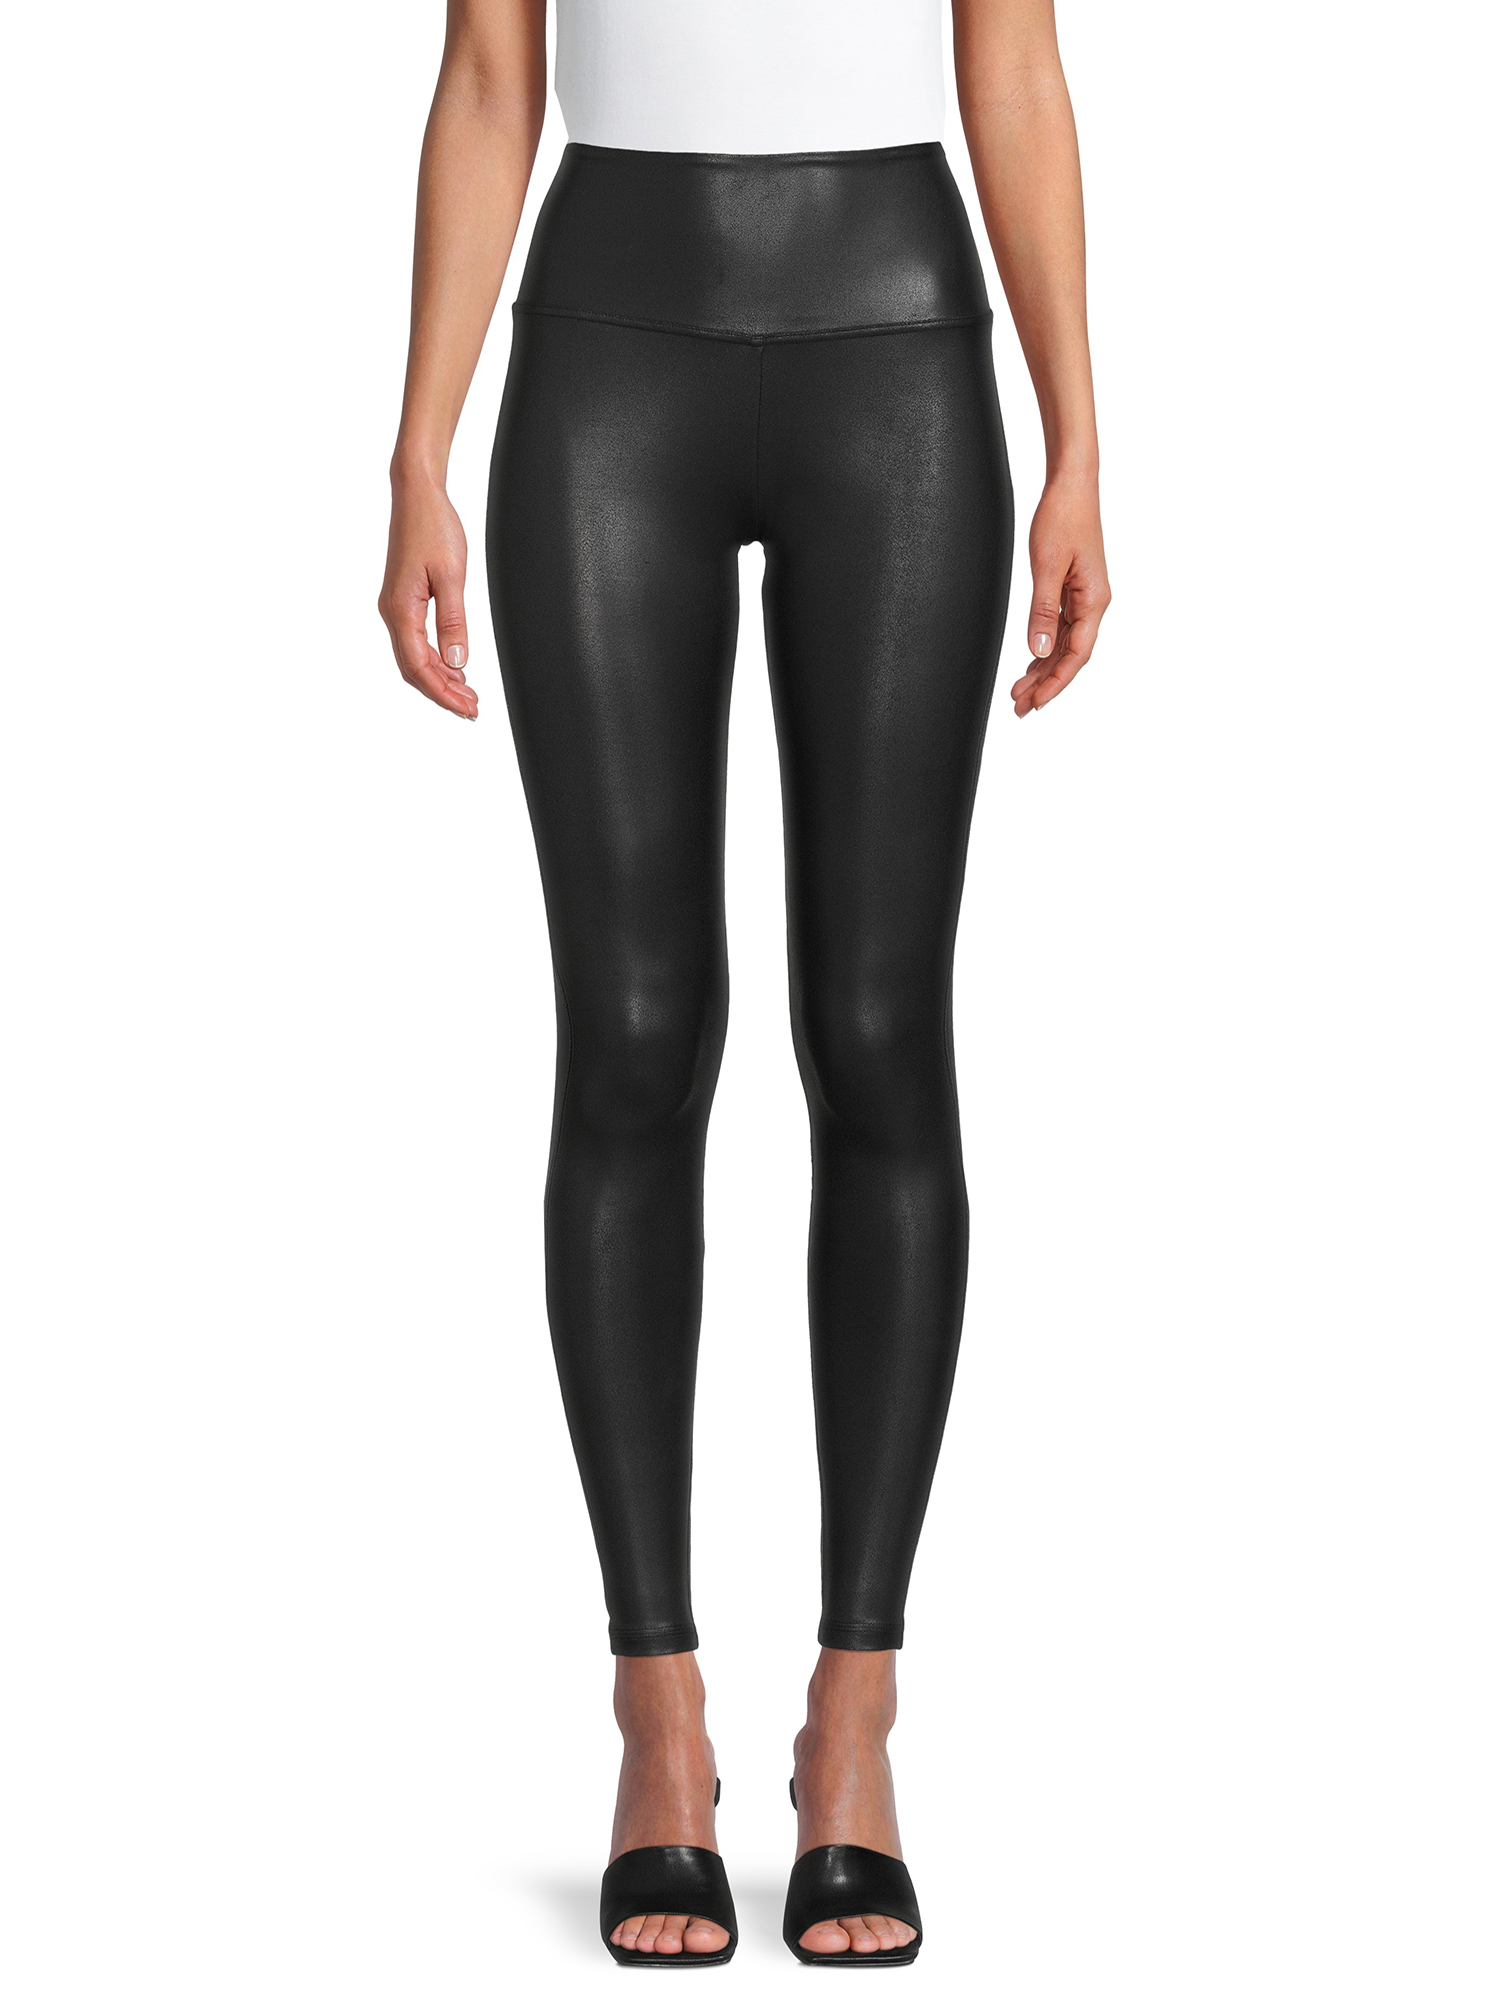 Time and Tru Women's Faux Leather Leggings, Sizes S-3XL - image 1 of 10